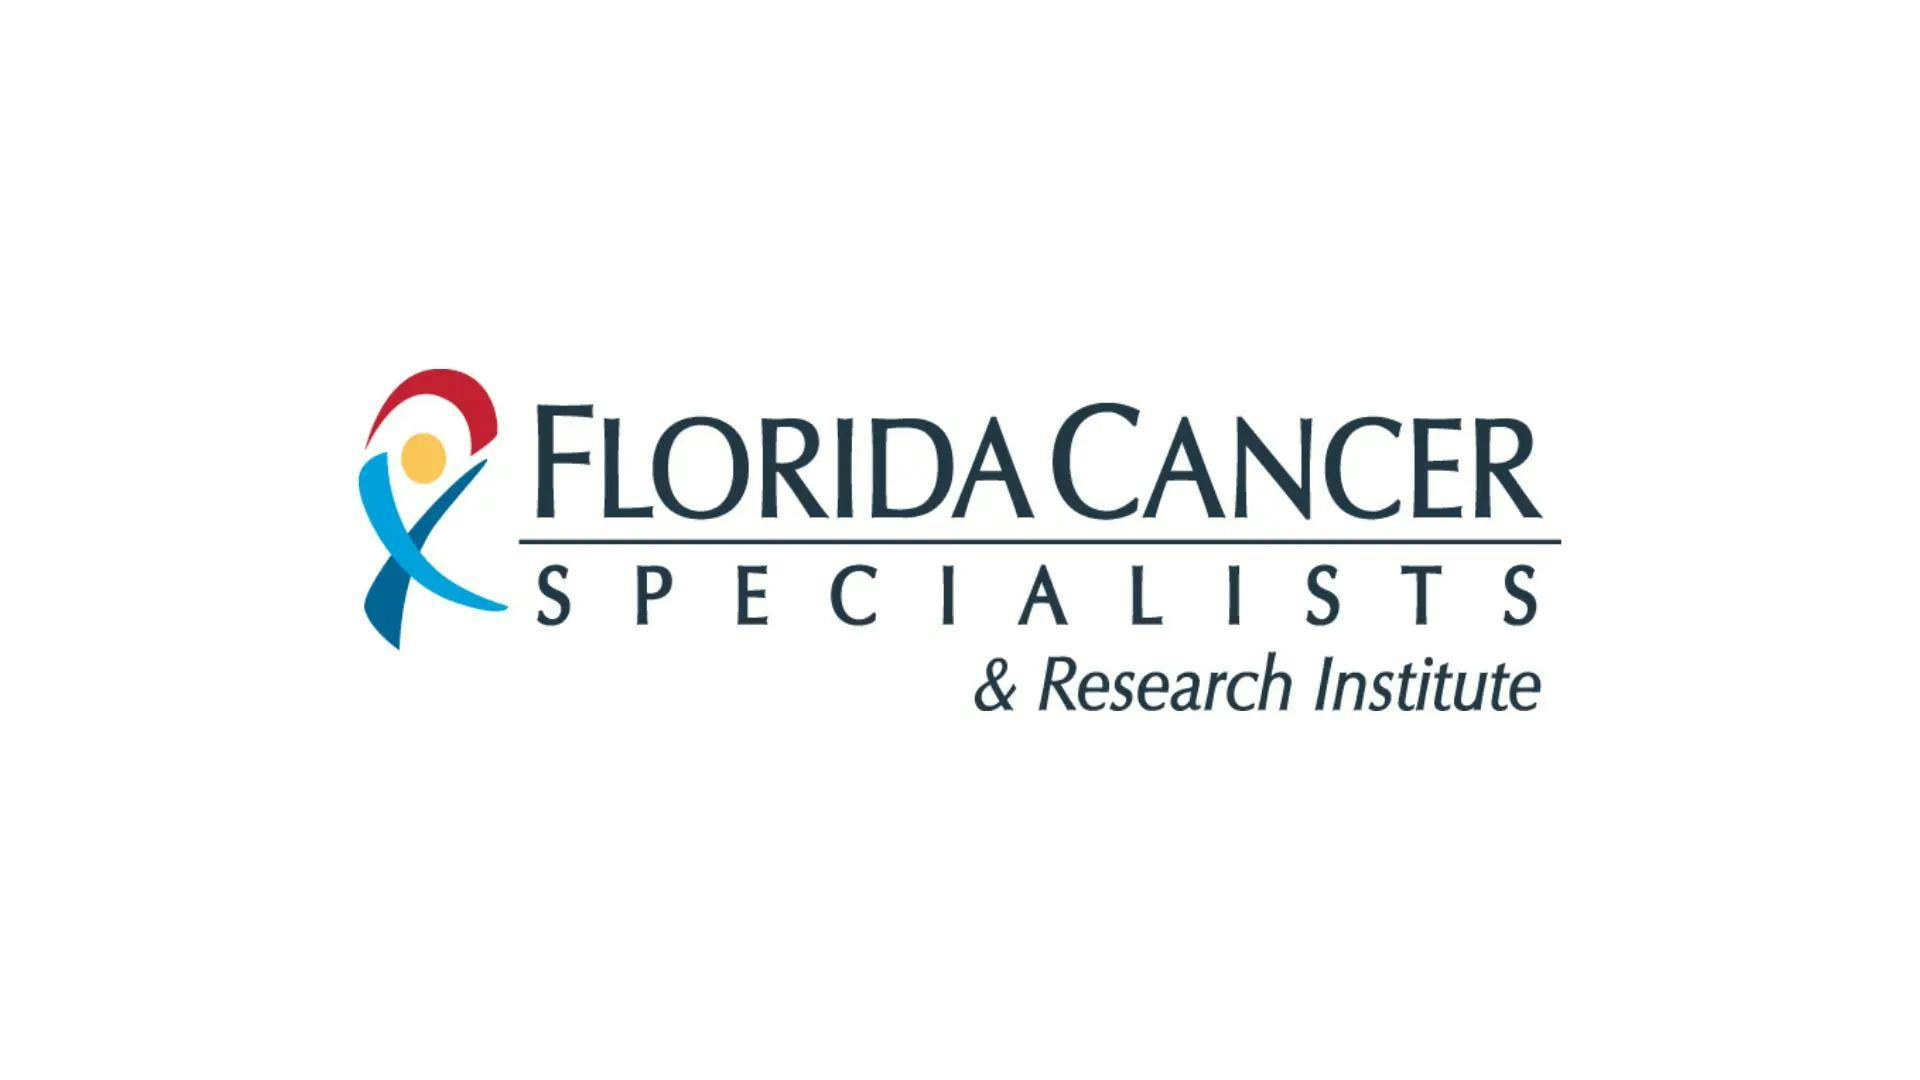 Florida Cancer Specialists & Research Institute Celebrates Addition of Next Generation Genomic Testing Capabilities to Advance Precision Oncology Approach to Patient Care